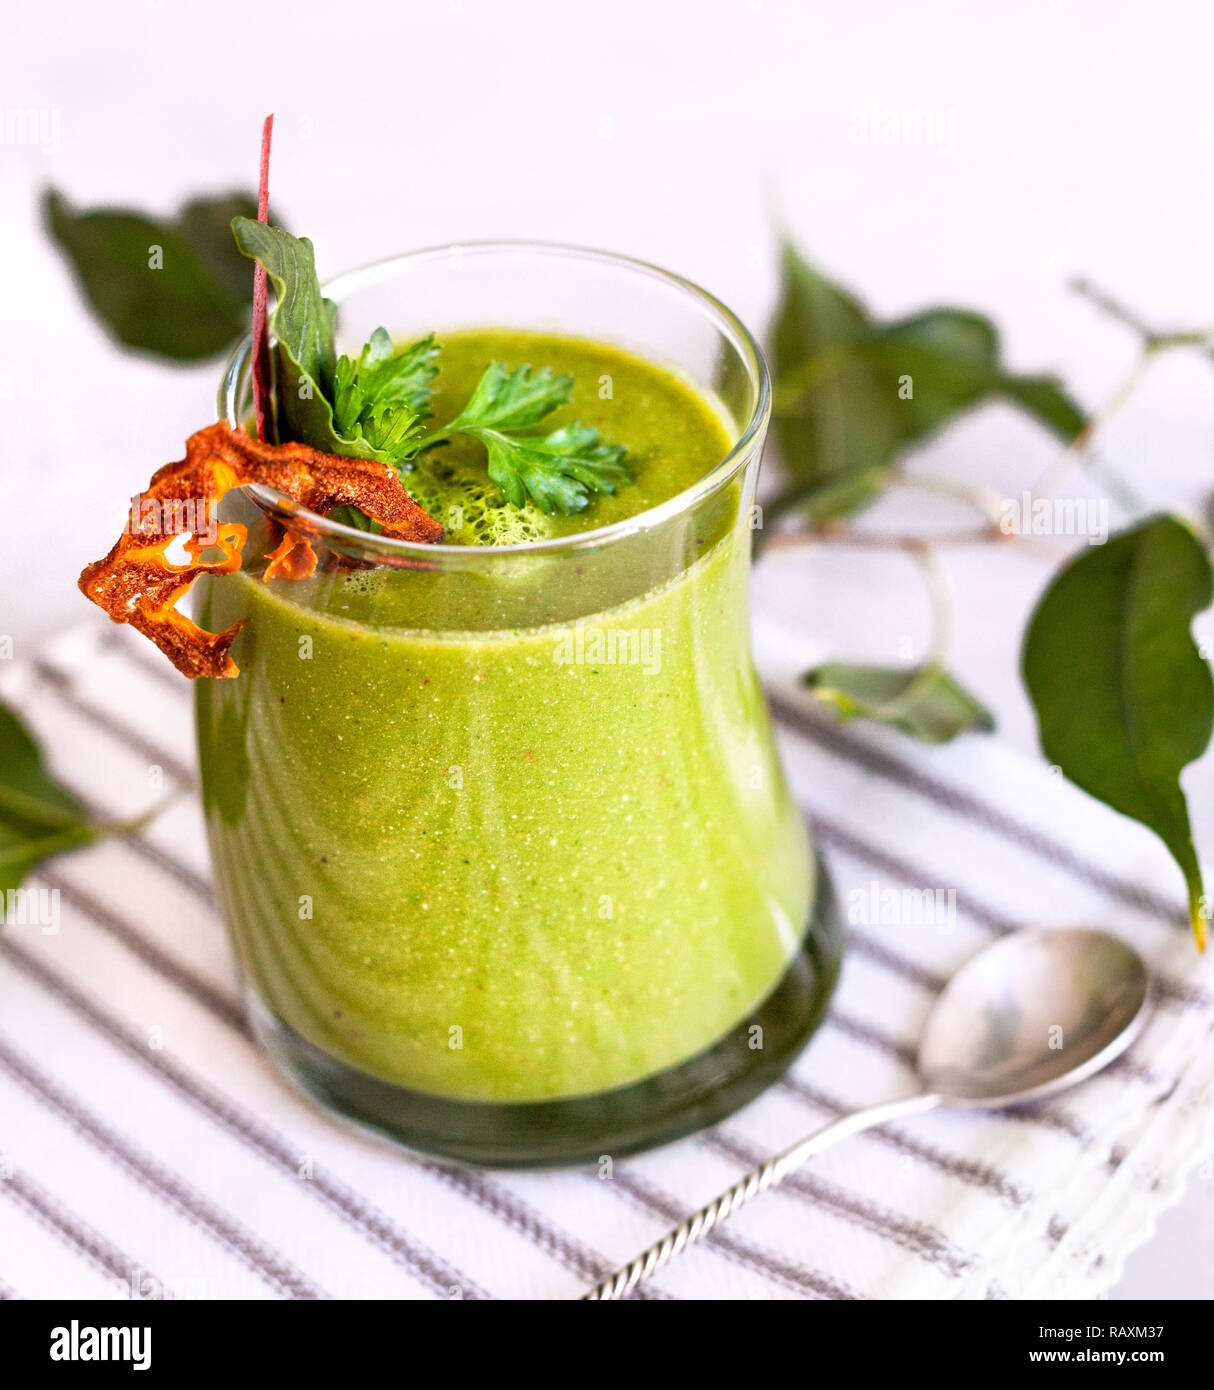 Green smoothie decorated with parsley and dry fruit close up in restaurant Stock Photo